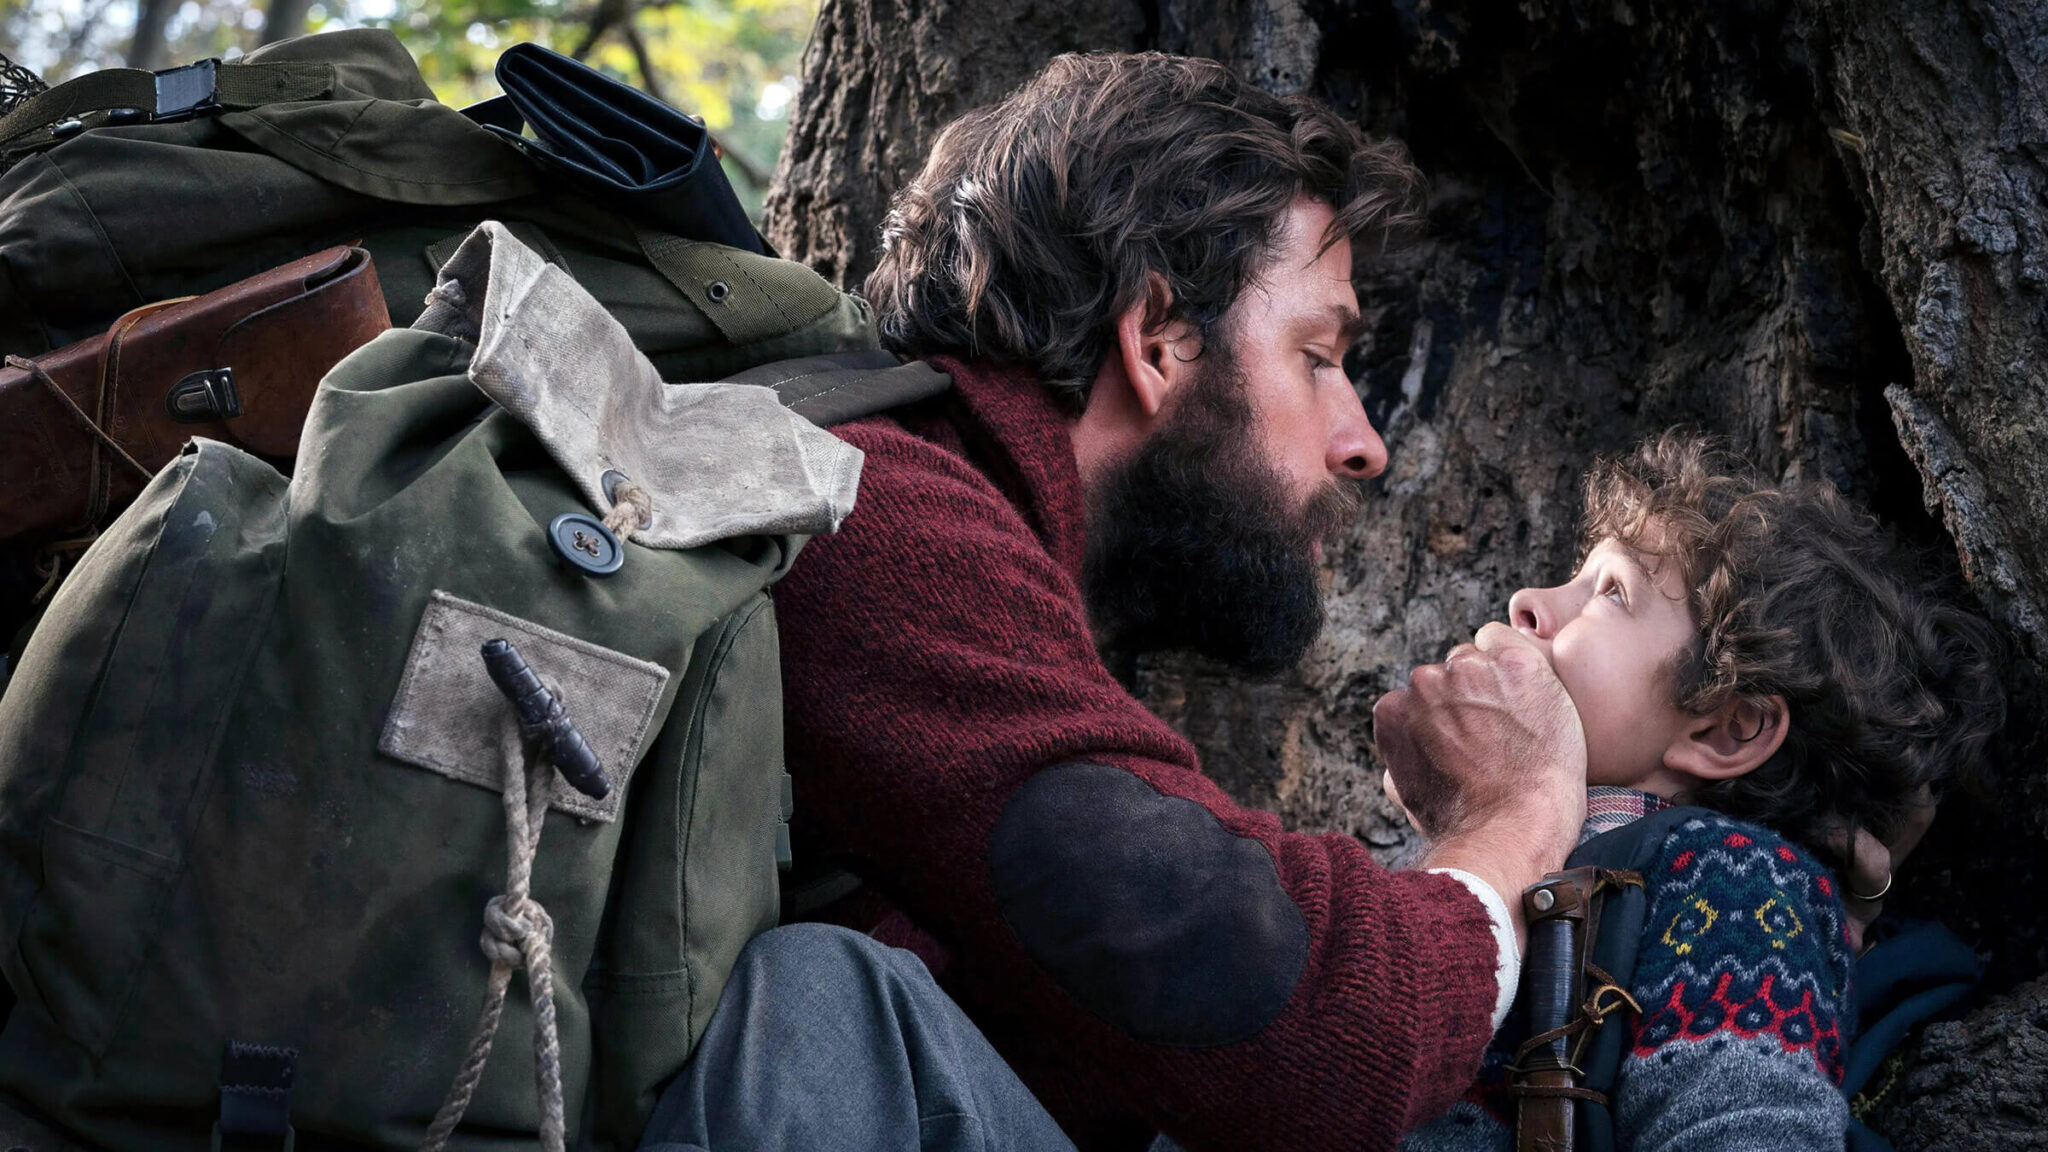 5 Screenwriting Lessons From A Quiet Place Writers Beck and Woods